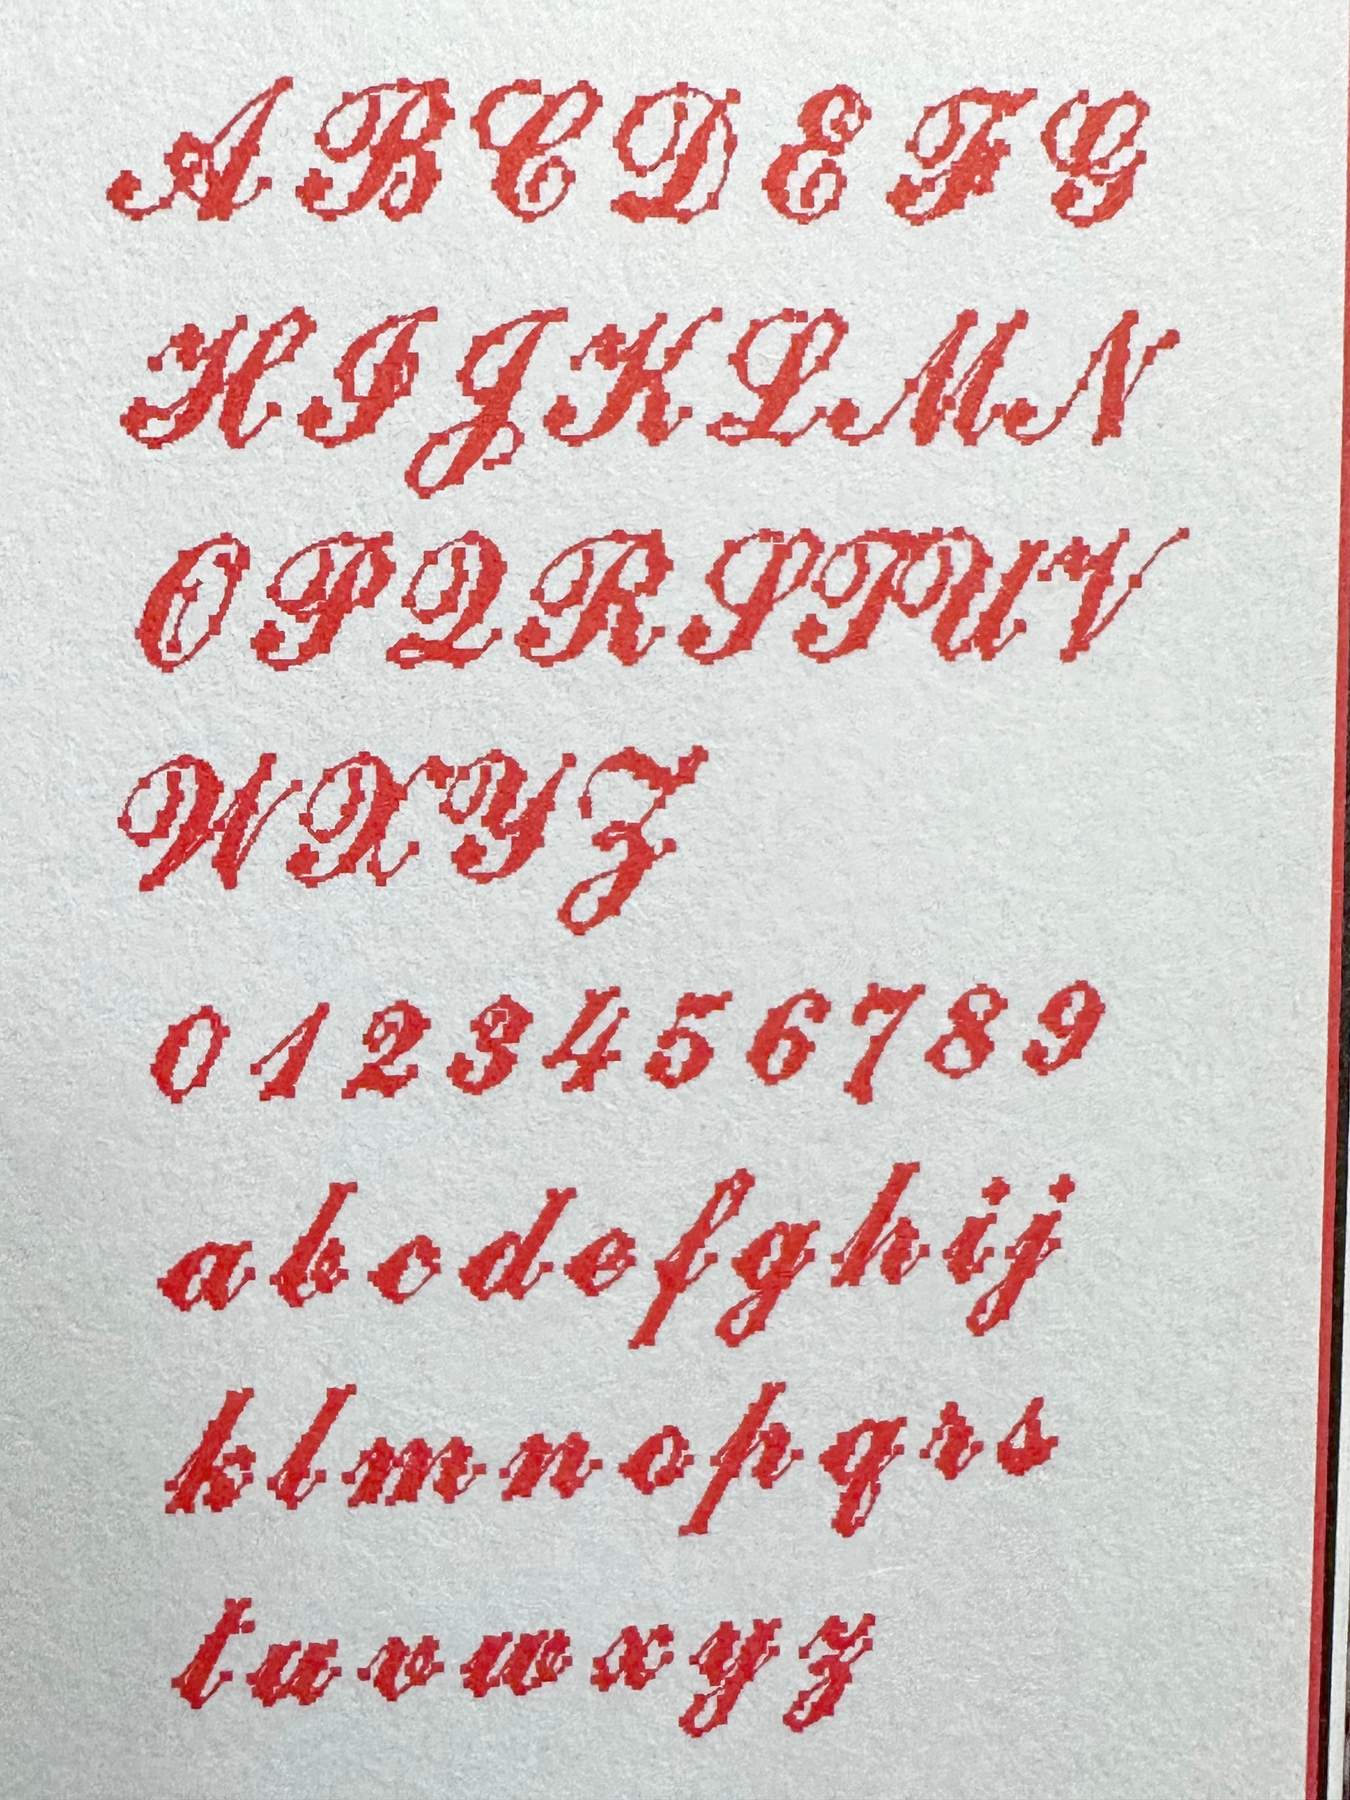 From Type 9010: Czech Digitized Typefaces